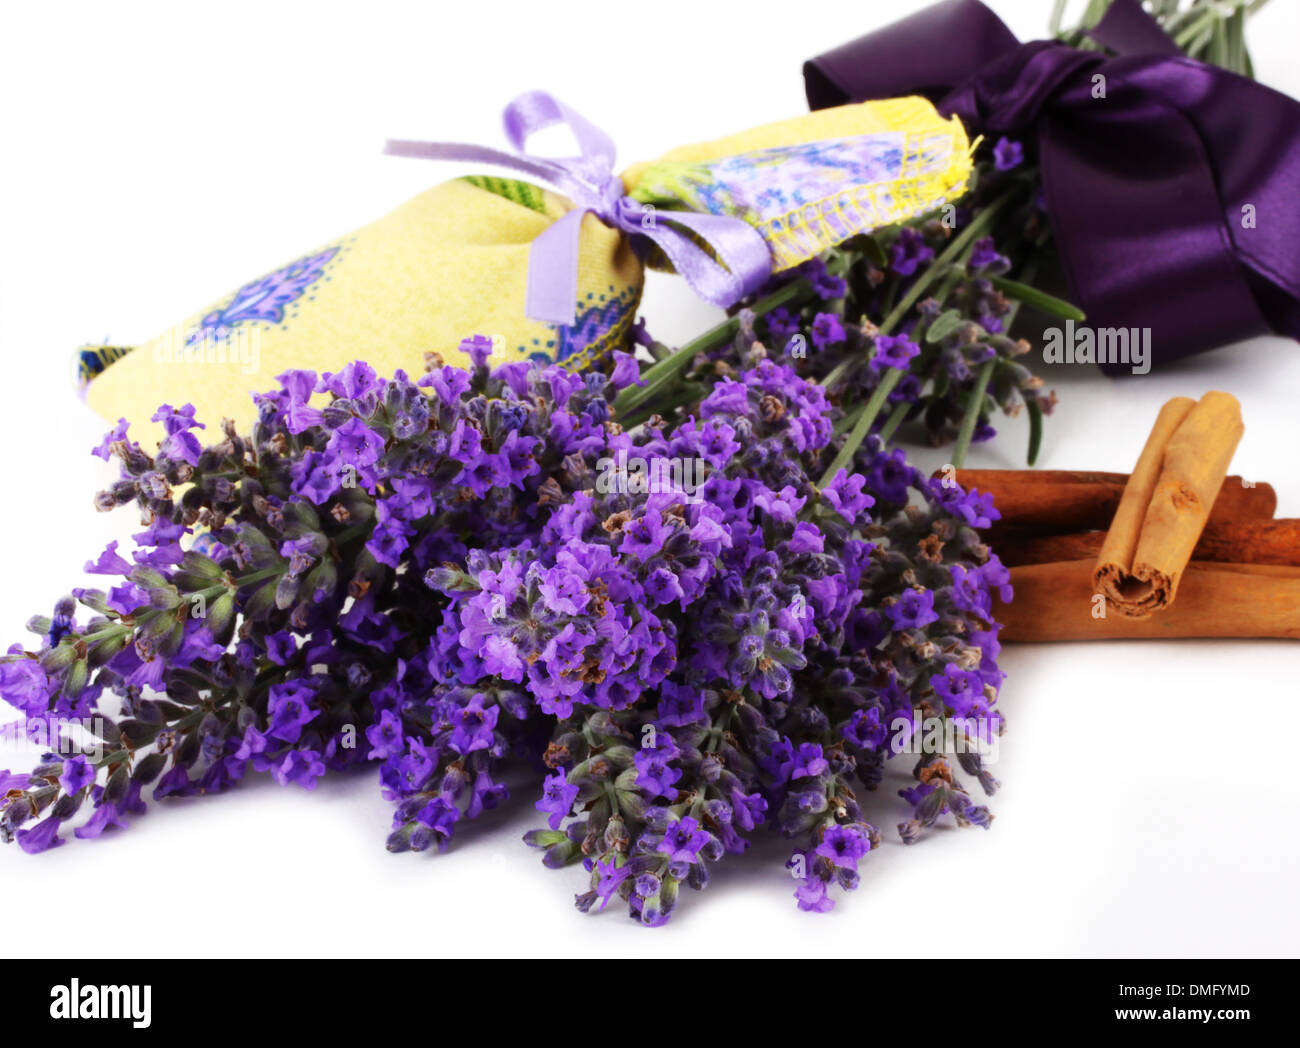 Lavender scented sachets on white background Stock Photo